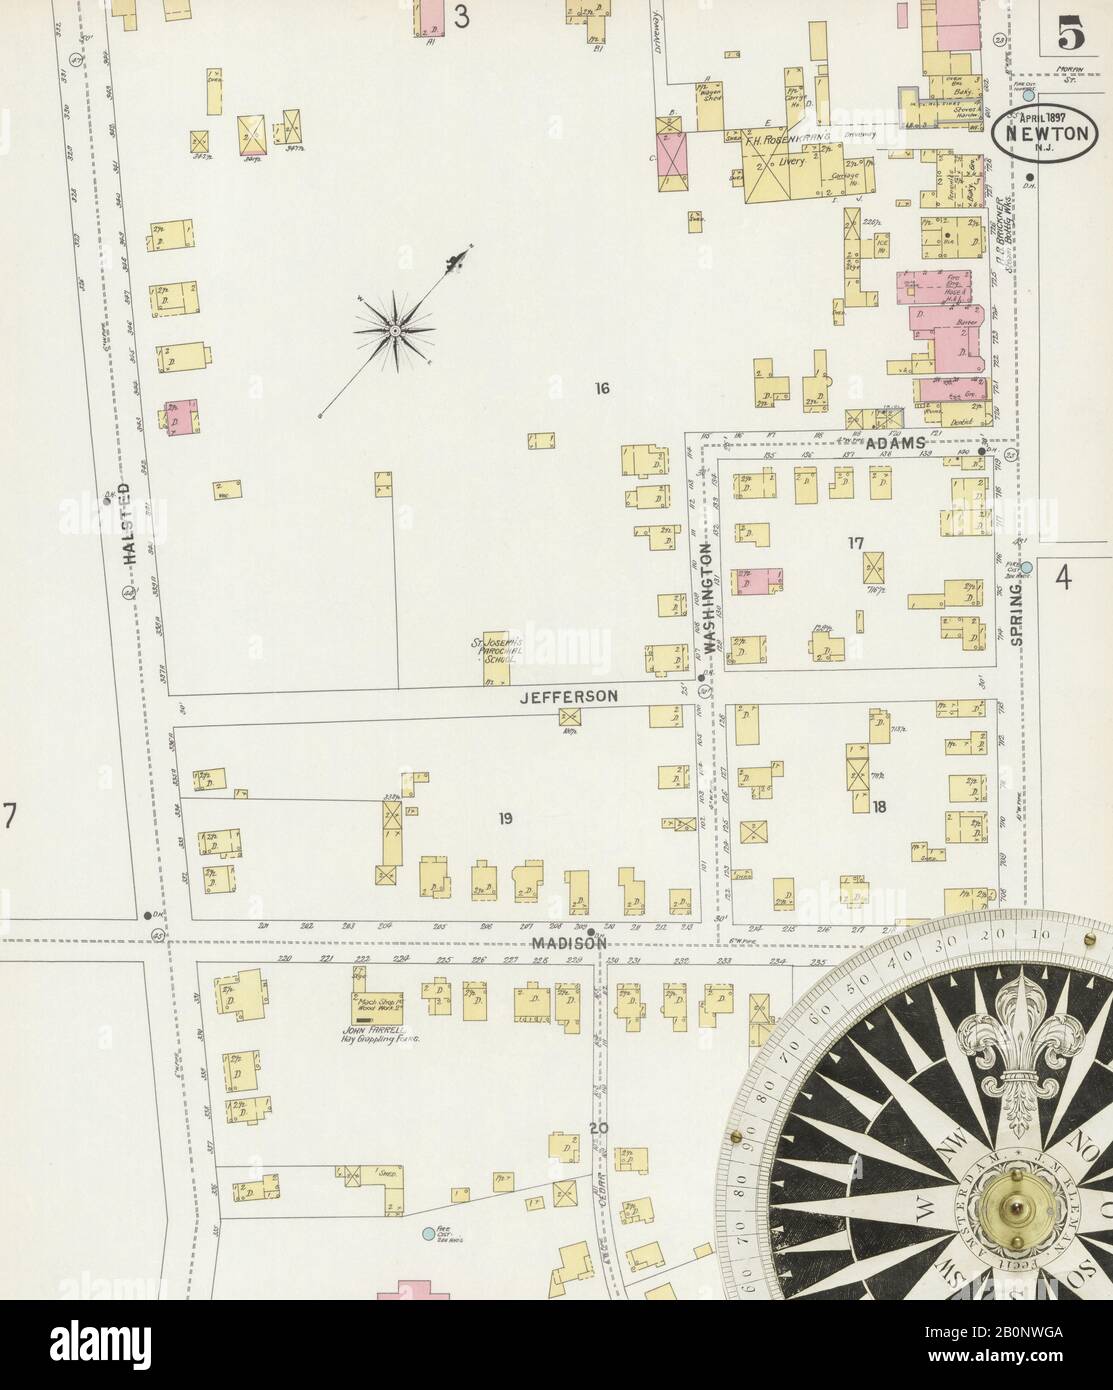 Image 5 of Sanborn Fire Insurance Map from Newton, Sussex County, New Jersey. Apr 1897. 8 Sheet(s), America, street map with a Nineteenth Century compass Stock Photo